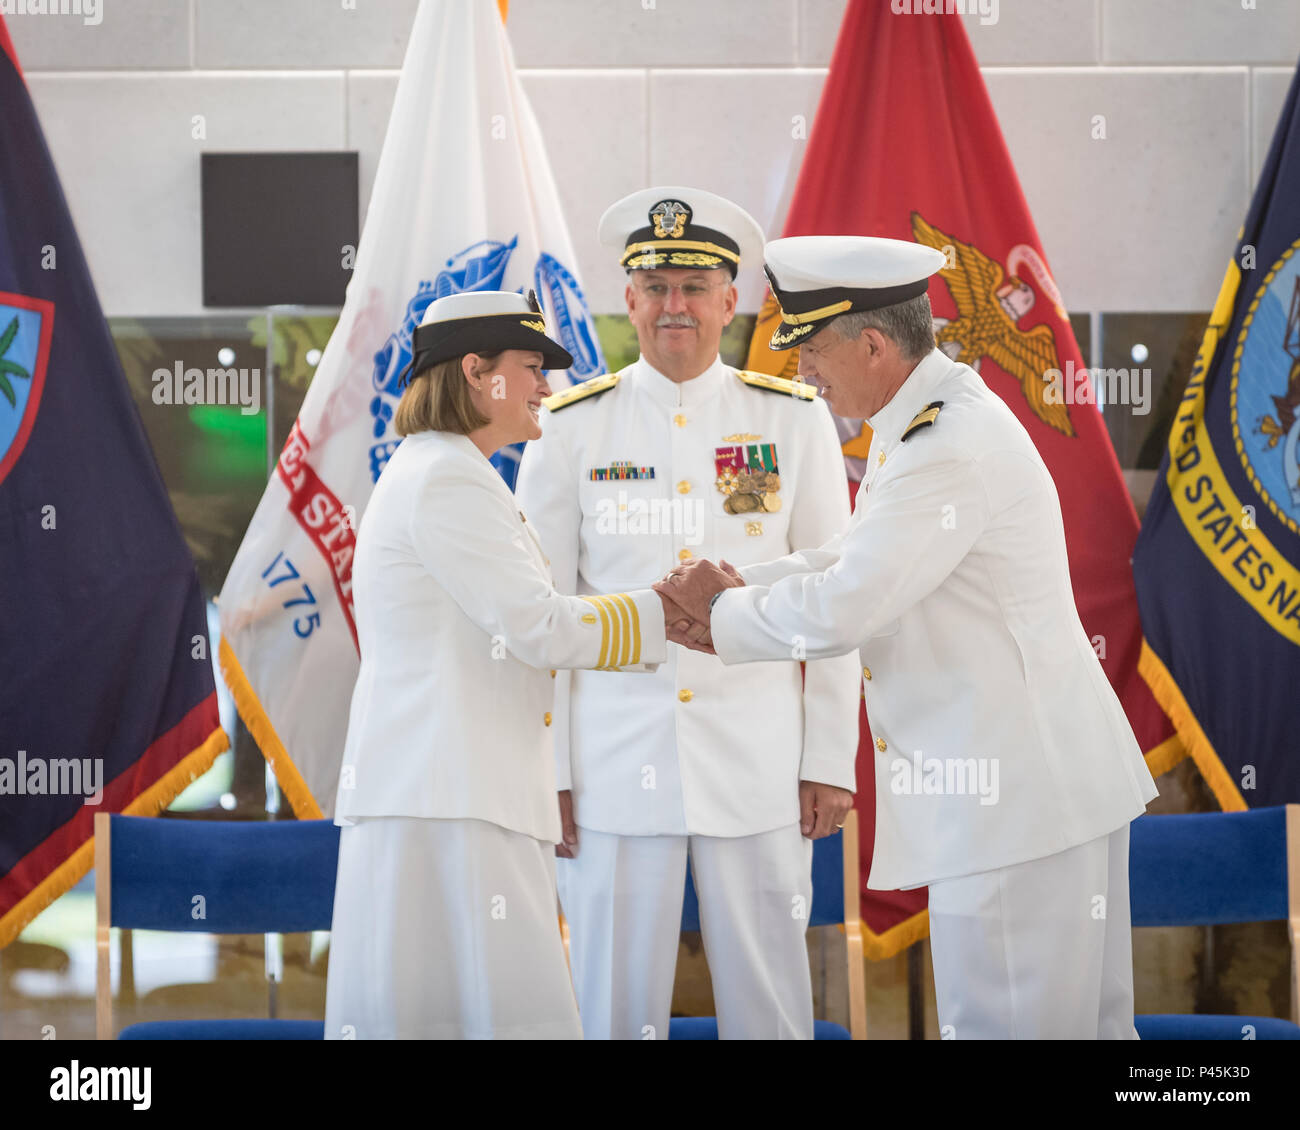 160630-N-QL030-271 NAVAL HOSPITAL GUAM - - Rear Adm. Bruce L. Gillingham (center), Commander Navy Medicine West, looks on as Capt. Jeannie Comlish (left) and Capt. Dan Cornwell (right) congratulate one another after formally changing command.  Cornwell relieved Comlish as commanding officer of U.S. Naval Hospital Guam in a change of command ceremony held at the main hospital in Agana Heights, Guam on June 30, 2016. (U.S. Navy photo by Hospital Corpsman 2nd Class Ryan Leverett/RELEASED) Stock Photo